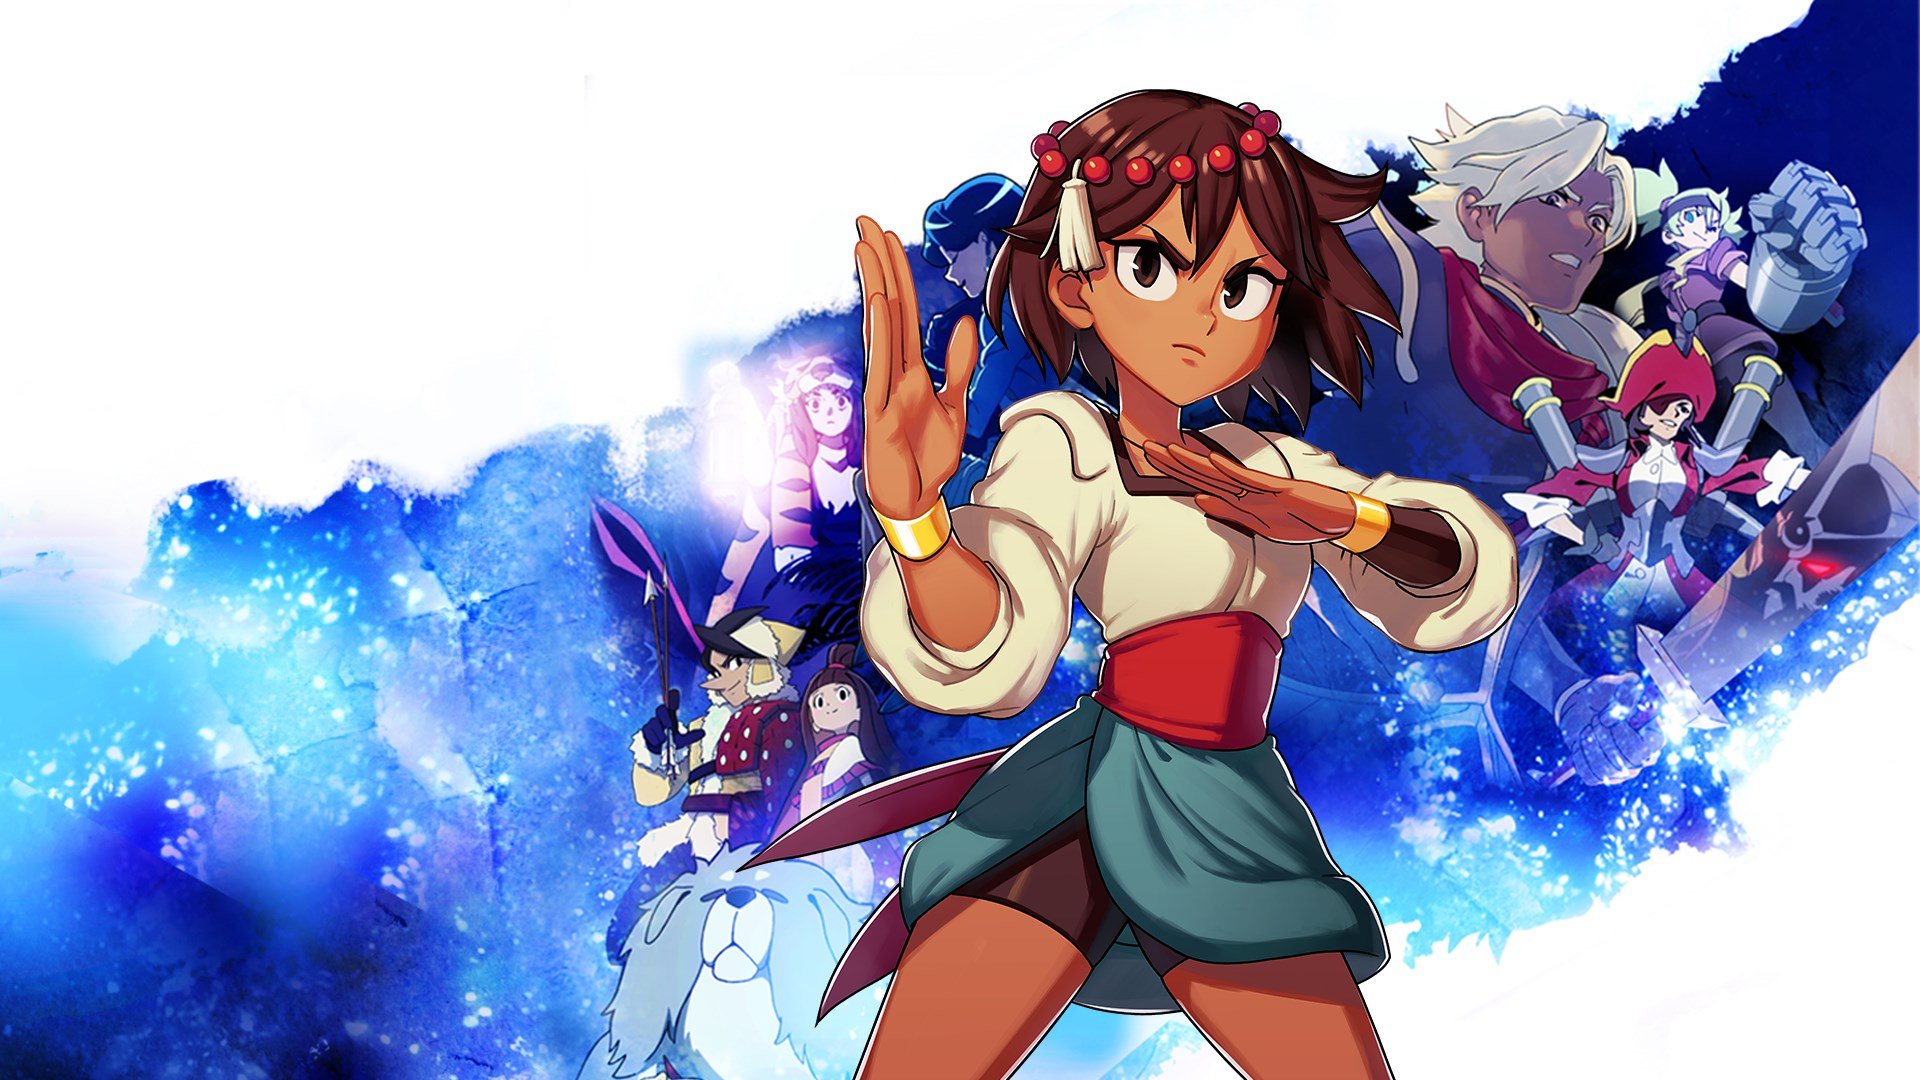 Indivisible cover image